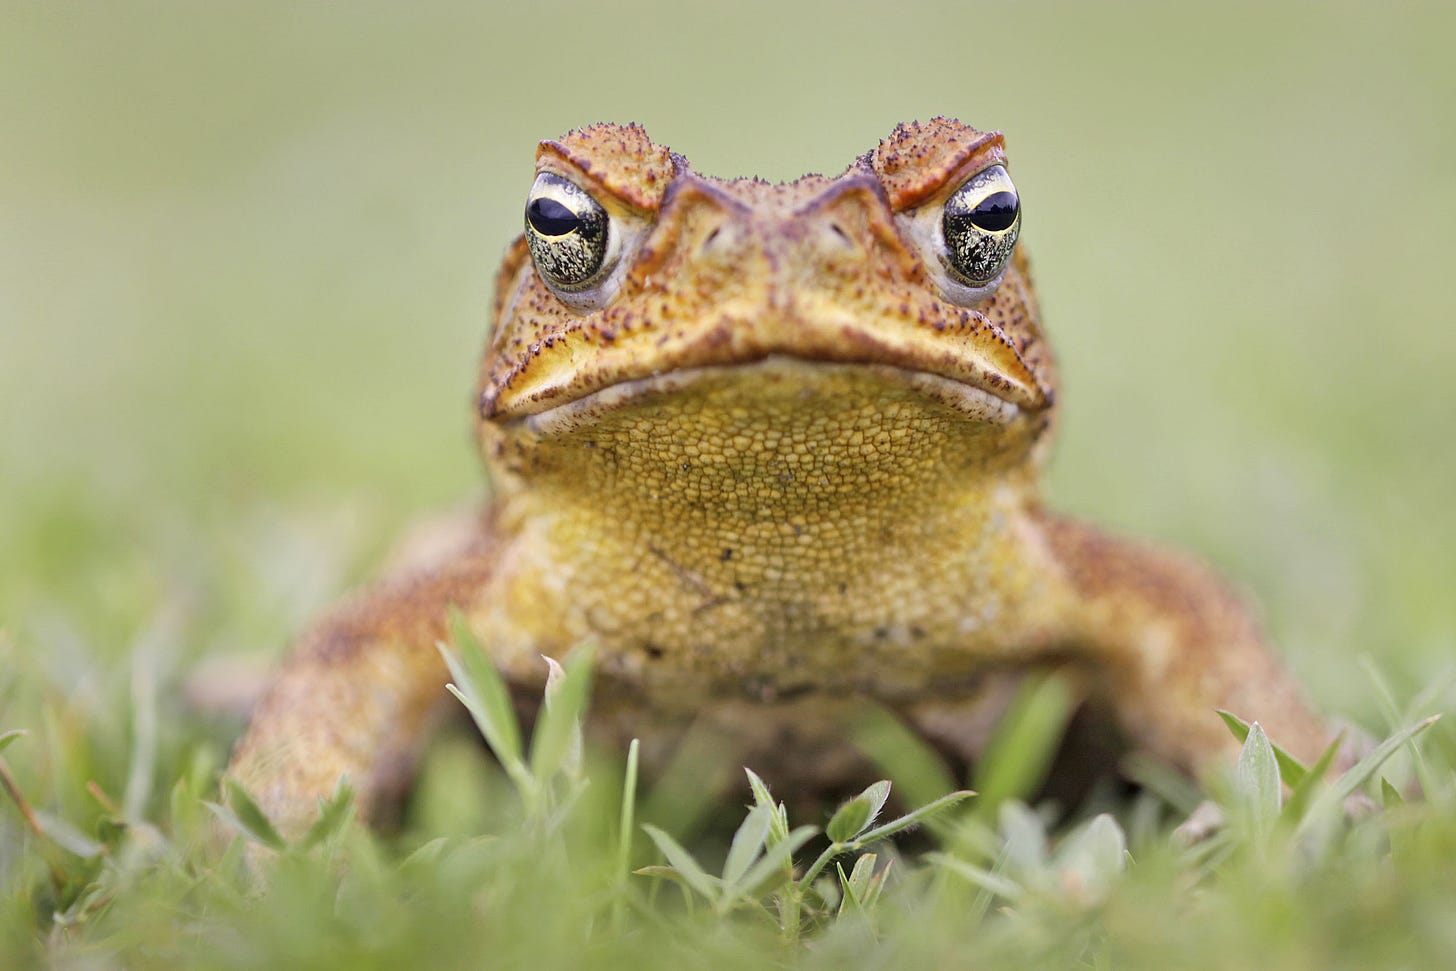 Cane toads make long-distance calls for love • Earth.com